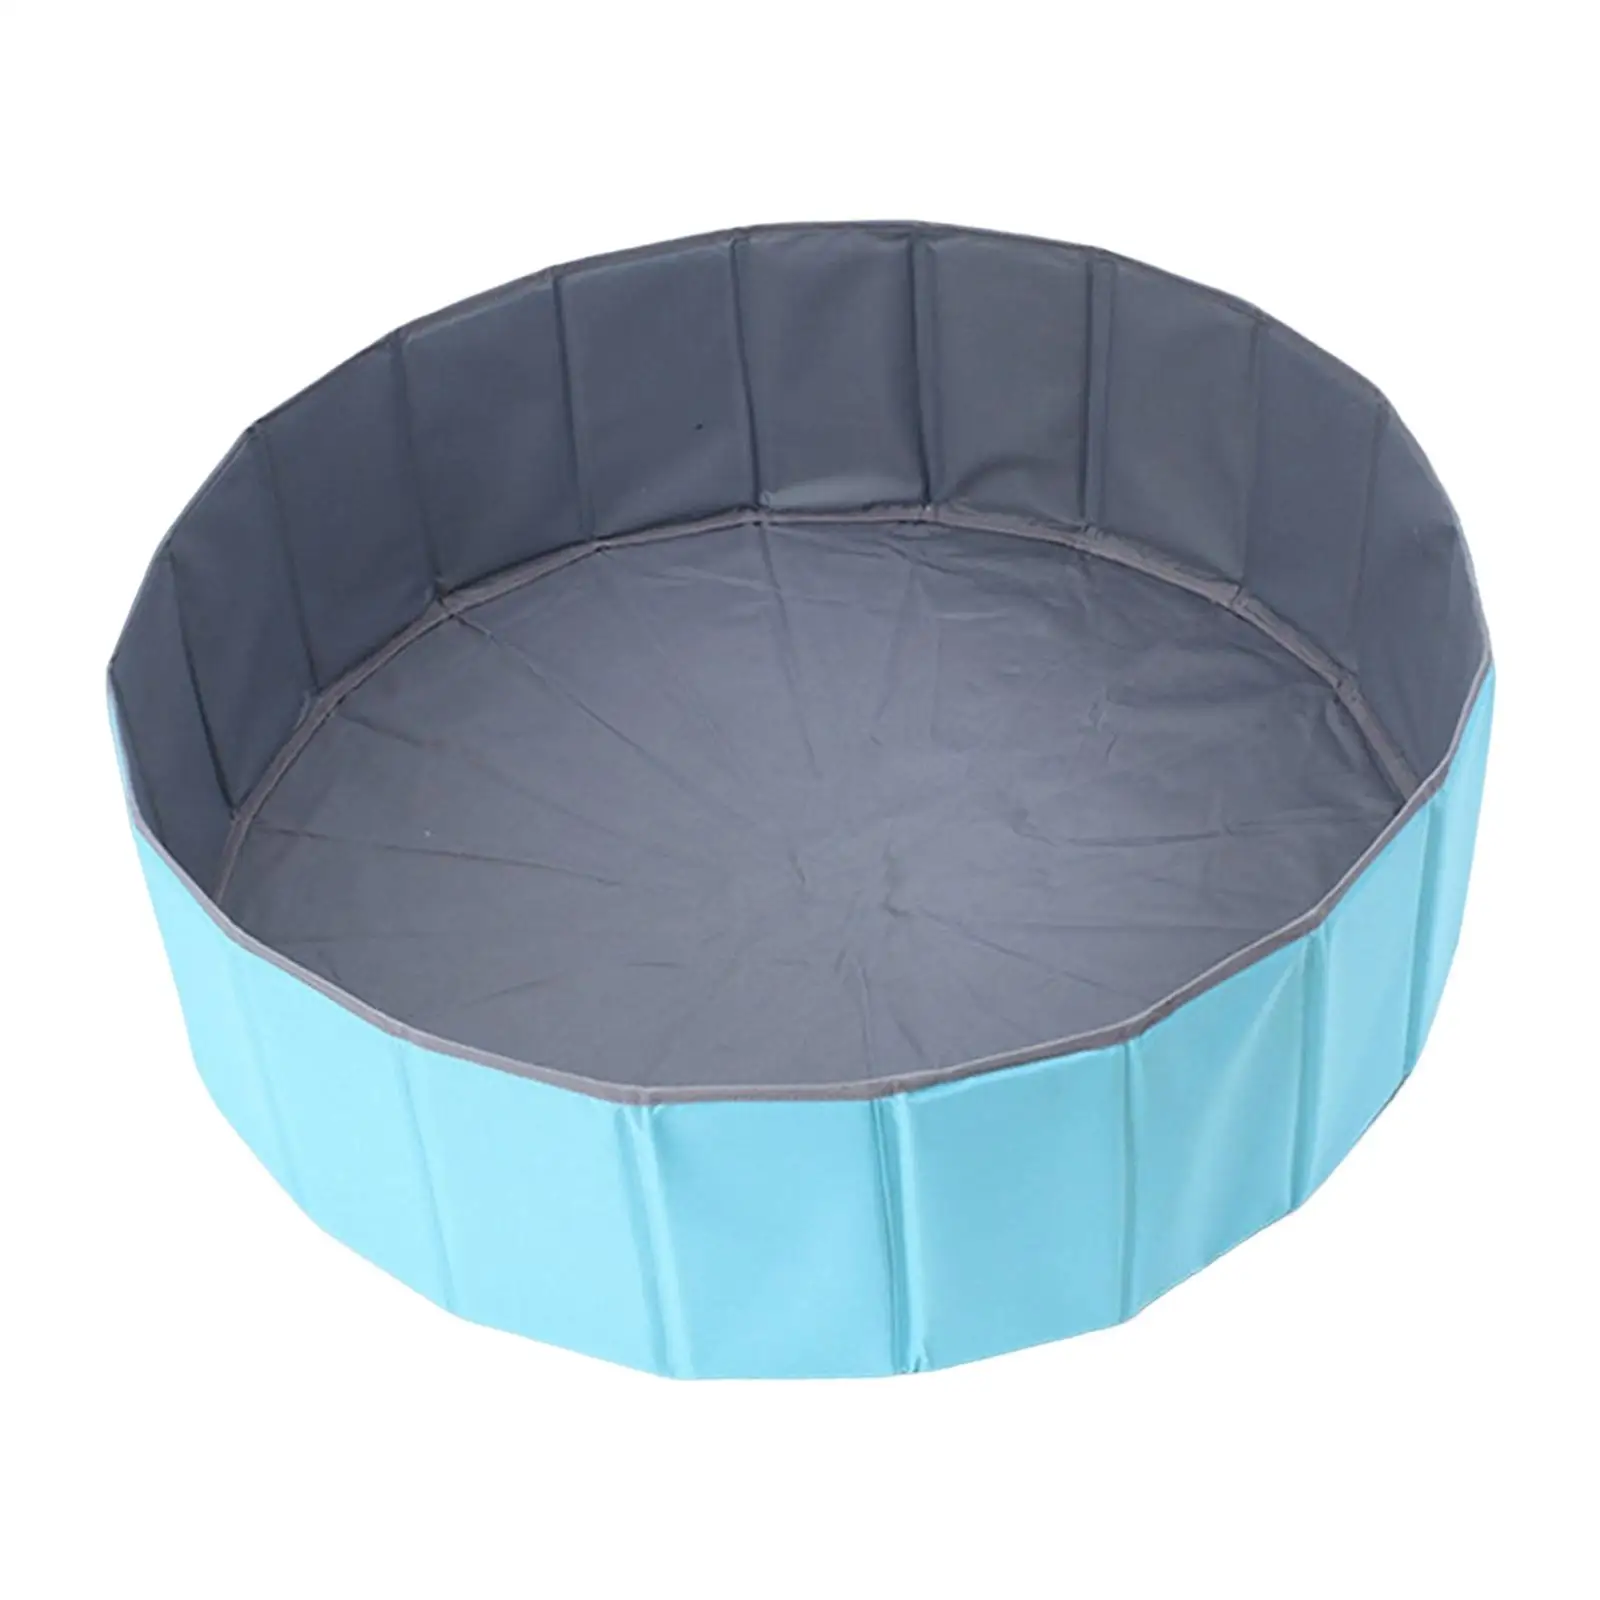 Foldable Sea Balls Pools Playing Tent Outdoor Indoor Play Portable Game Room Sandbox No Need Inflate Baby Fence Park